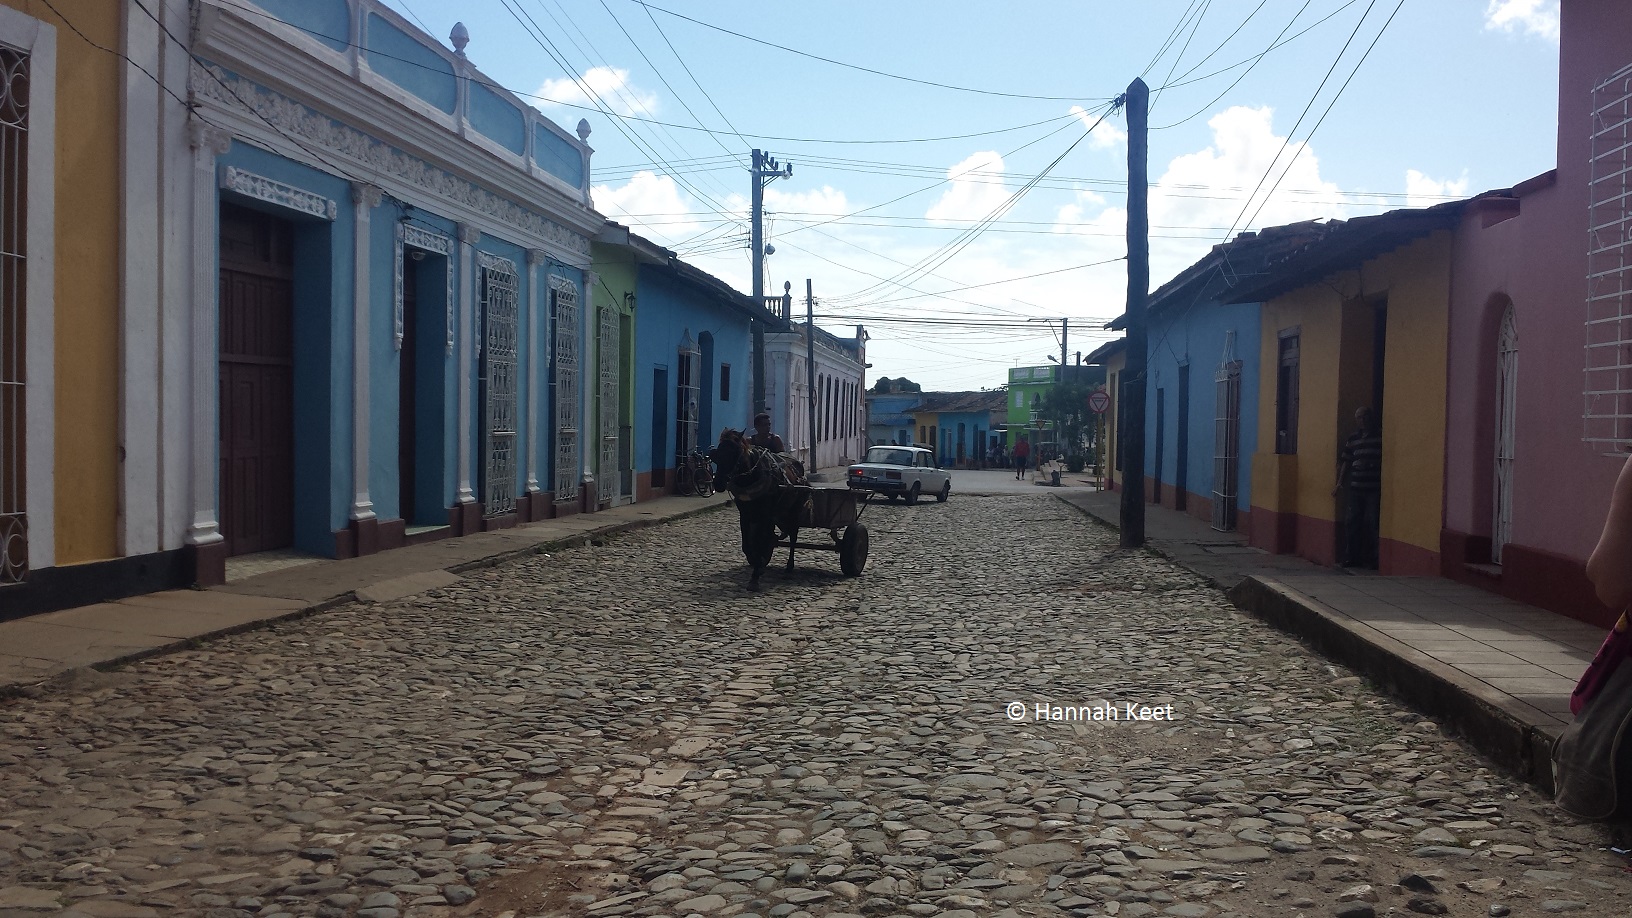 Trinidad, cobbled streets, horse and cart